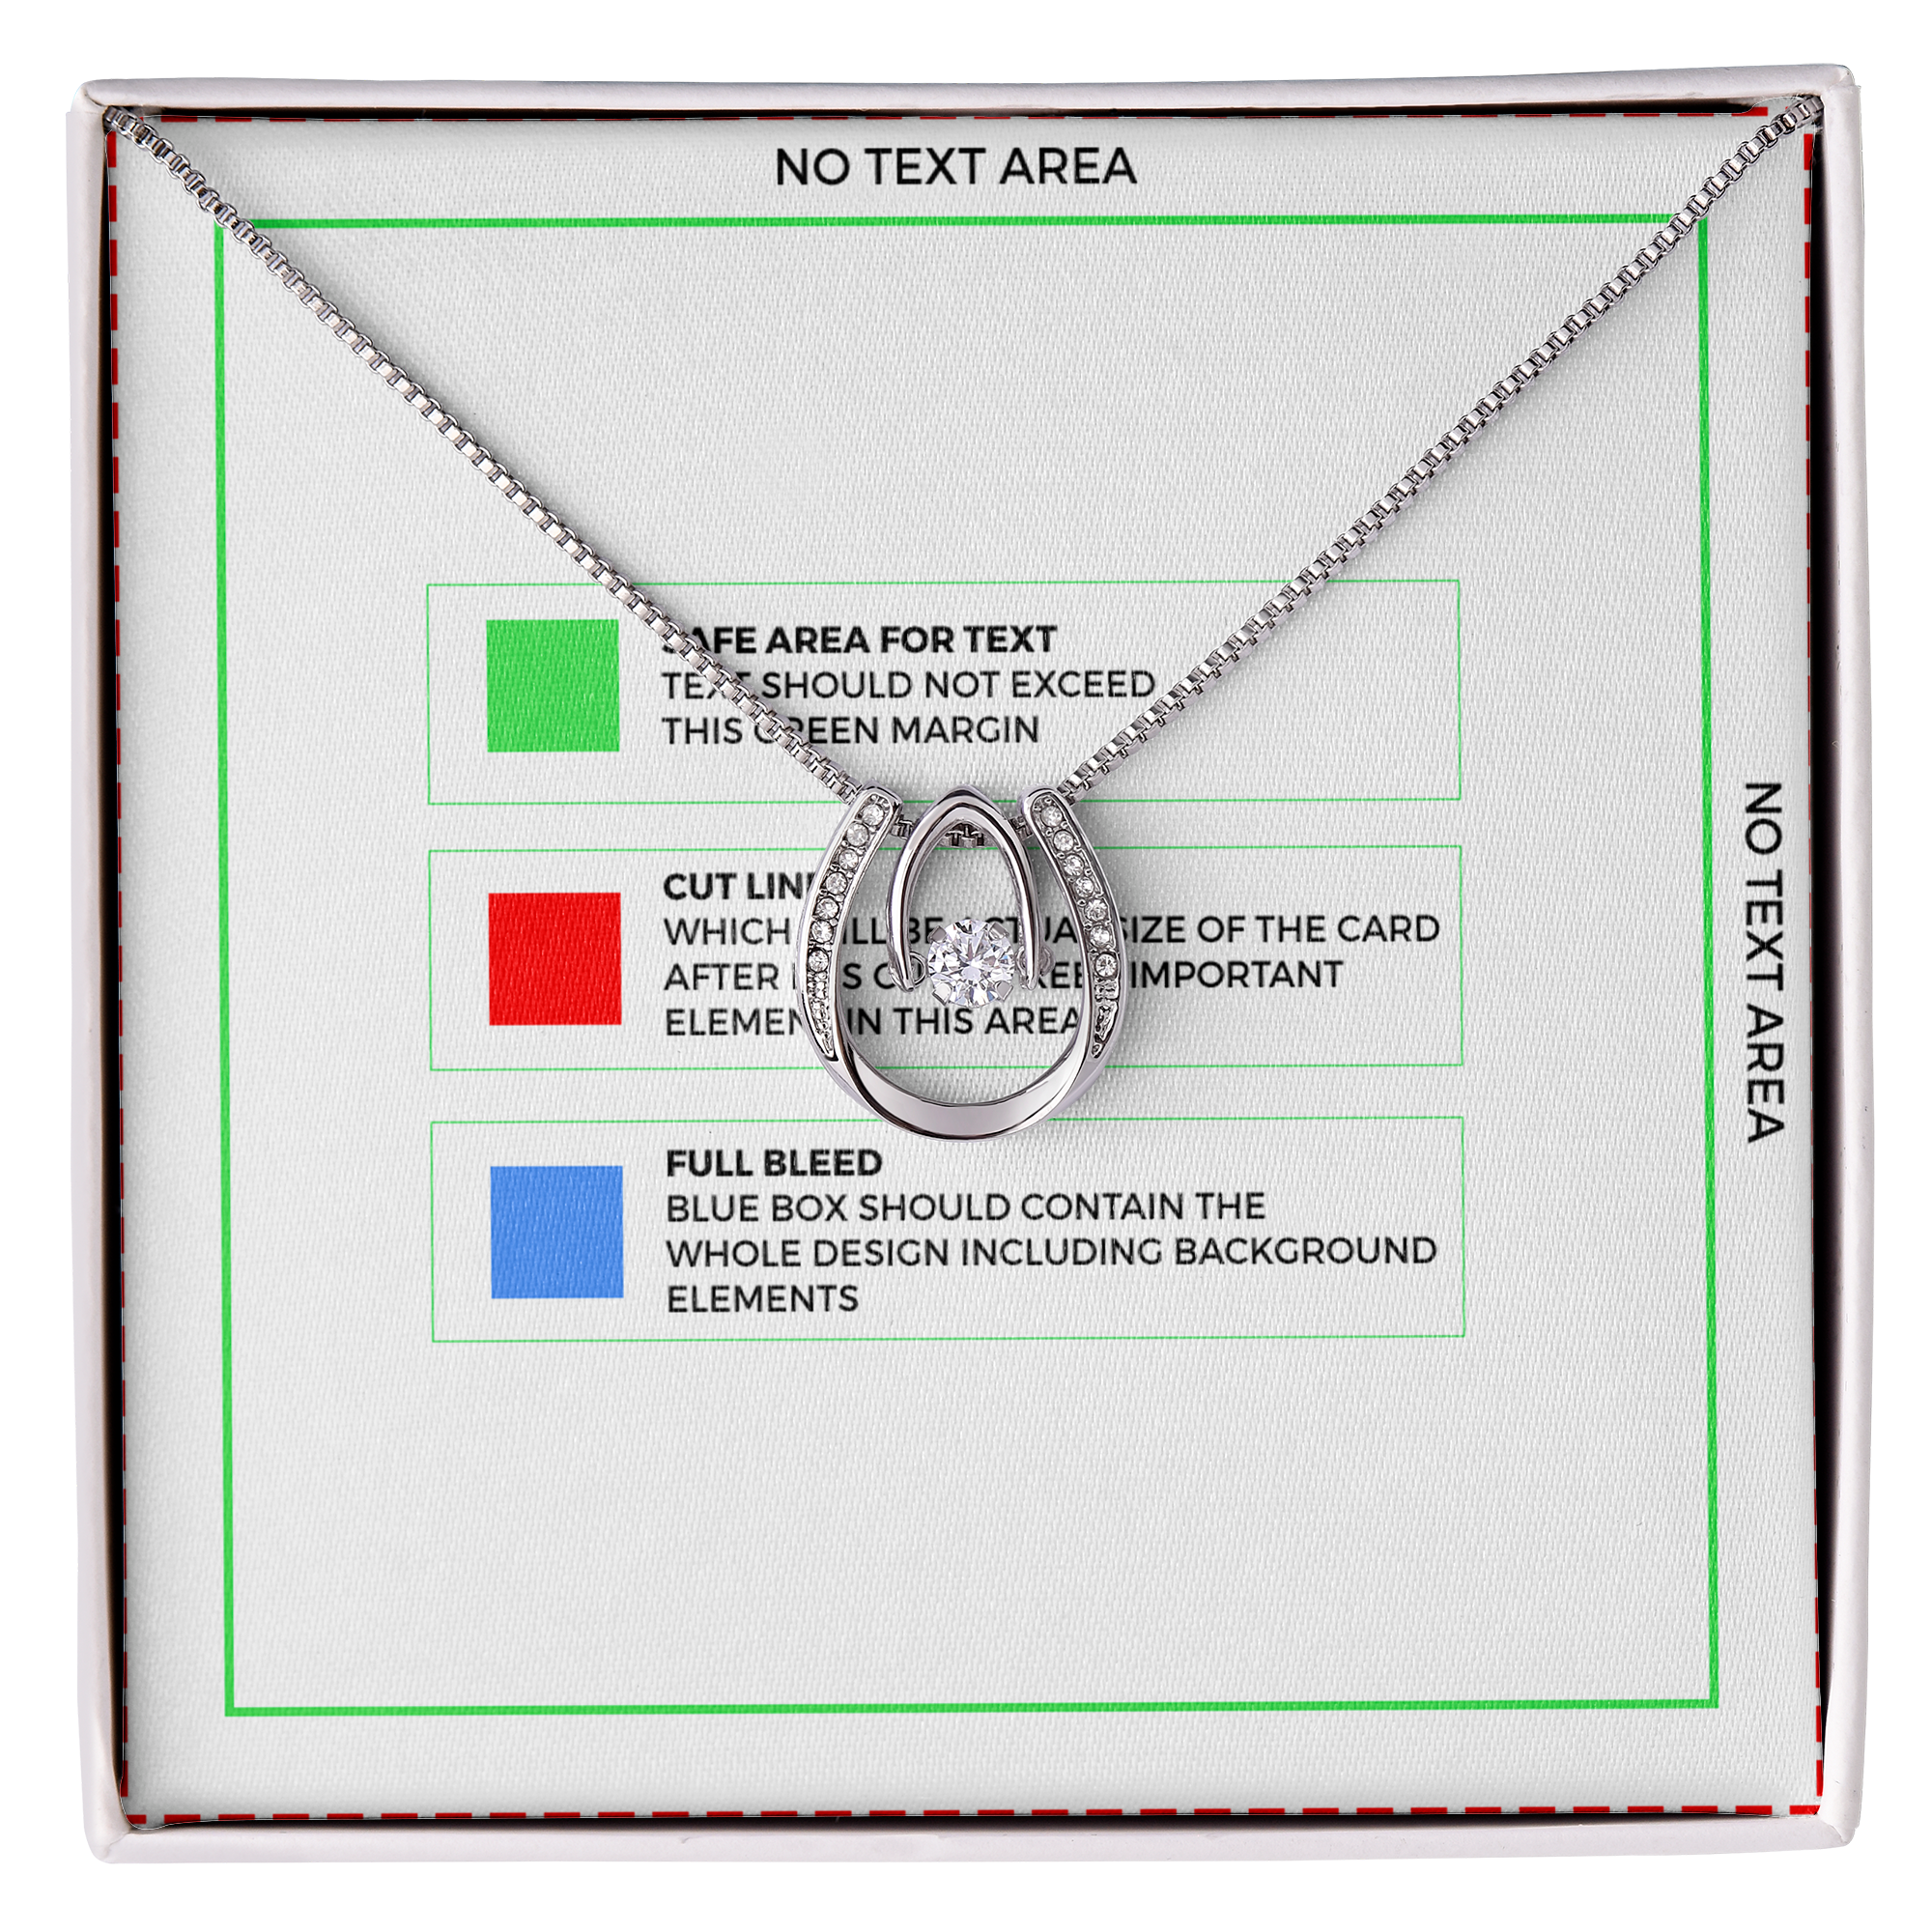 Mom You're the Best Lucky Horseshoe Necklace Message Card 14k w CZ Crystals-Express Your Love Gifts